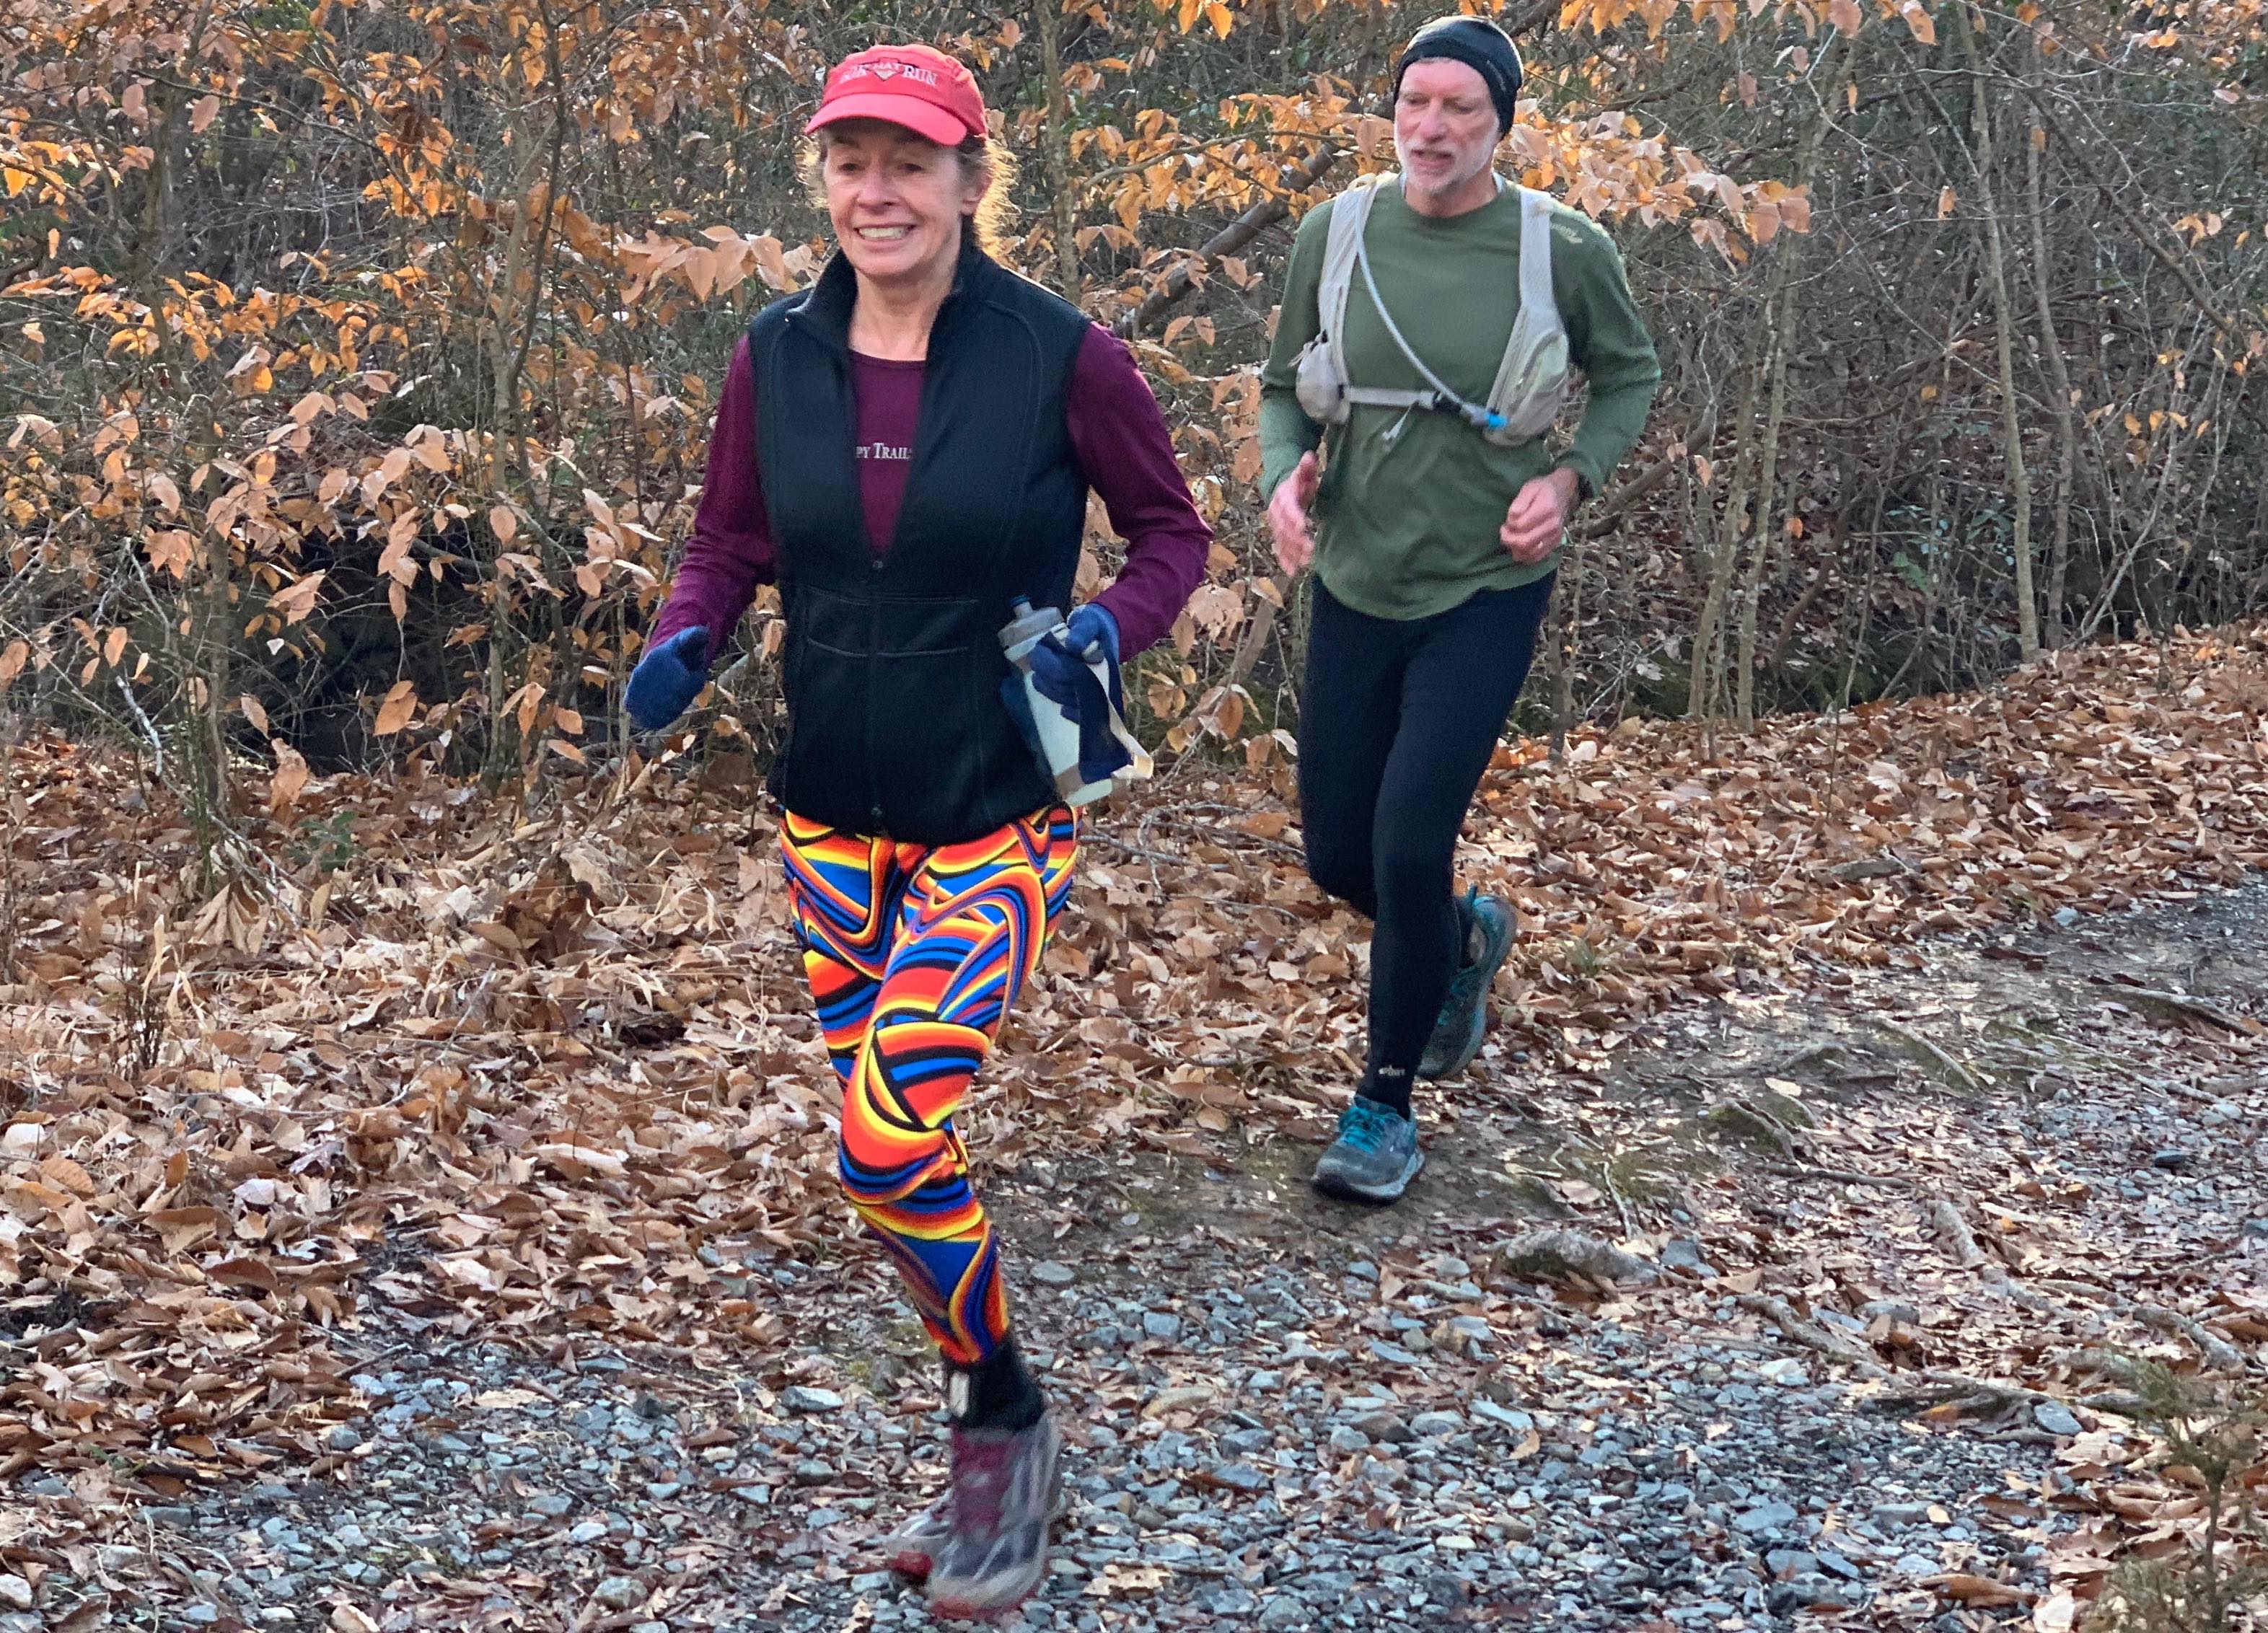 Linda Wack channels Team Slug member, James Moore, with her colorful tights at the 2020 Redeye